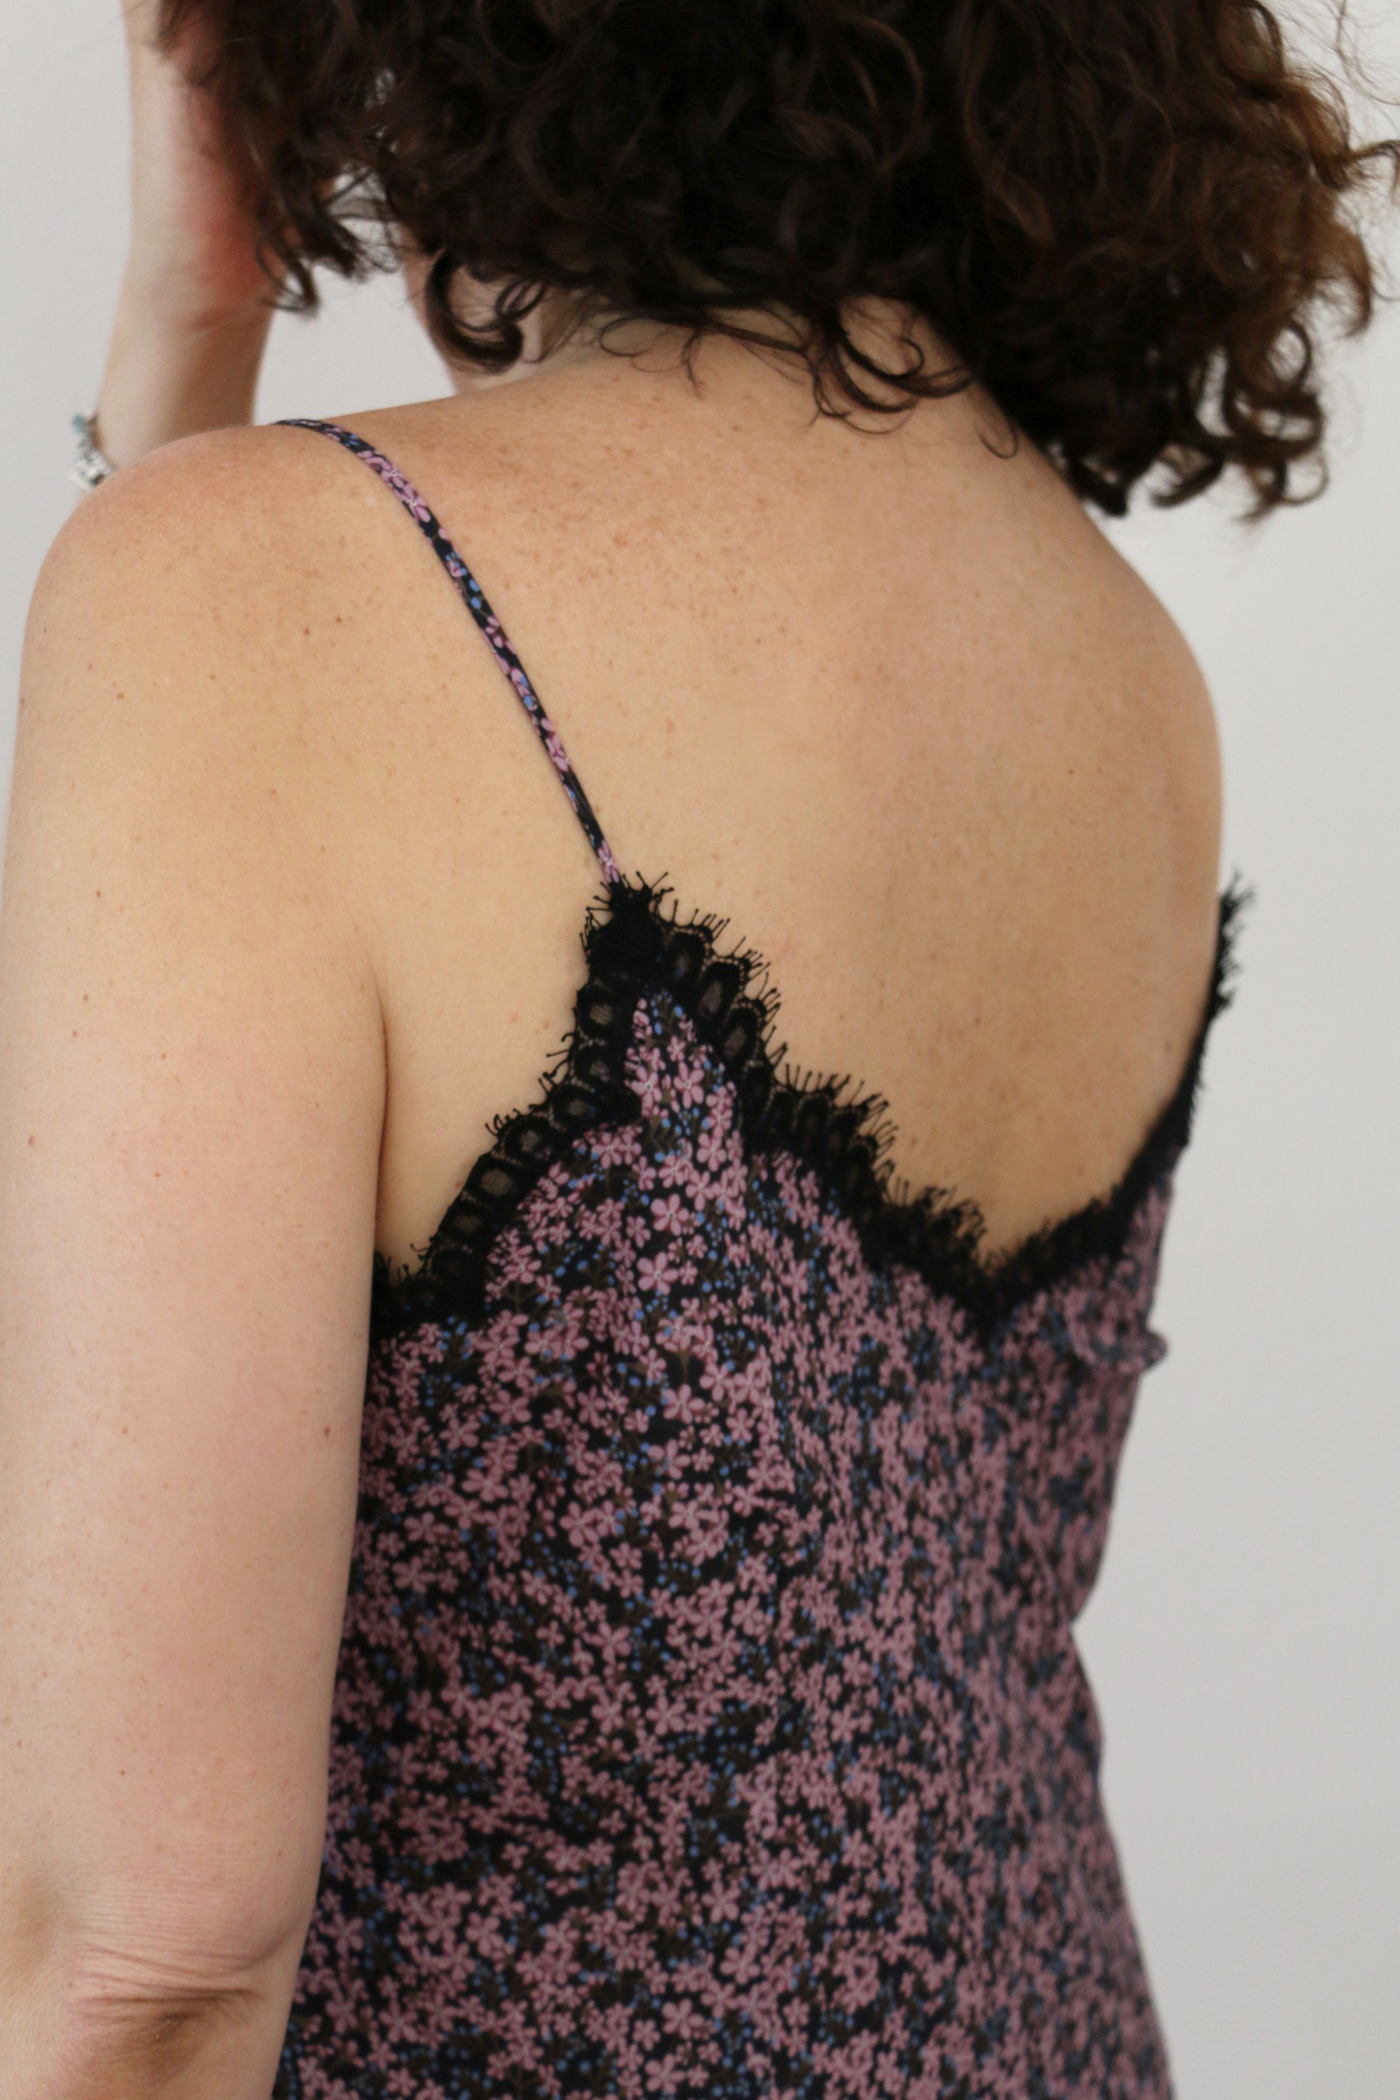 Sewing with lace, Blog